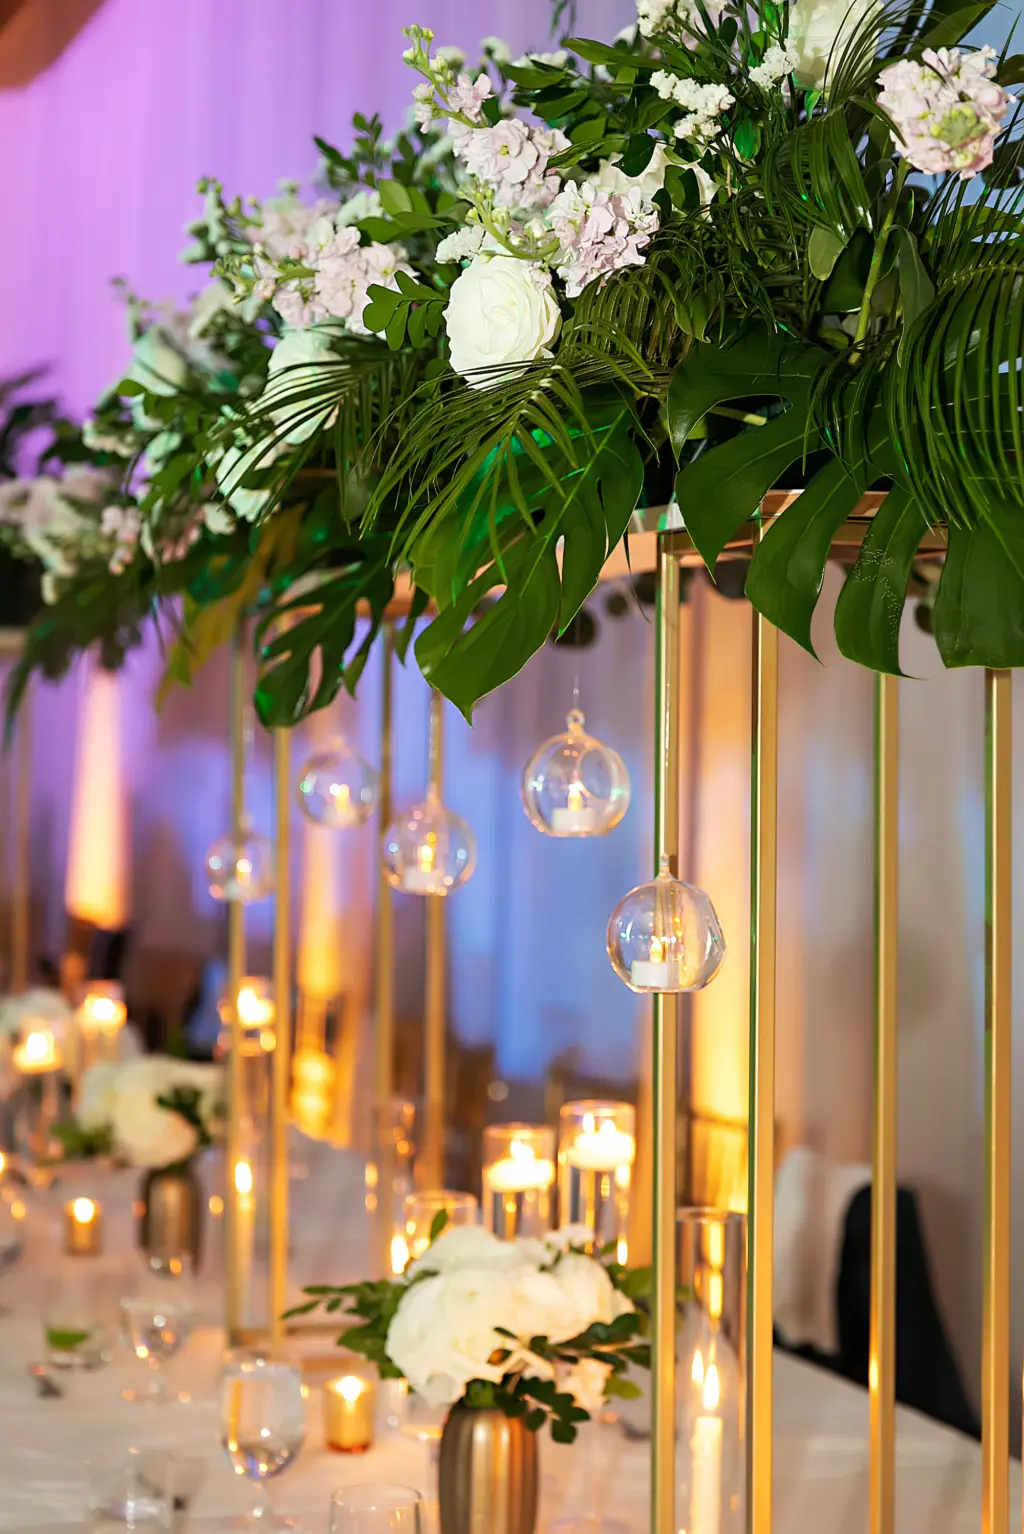 Classic Elegant Tall Gold Flower Stand Centerpiece Inspiration with Hanging Tea Light Candles, Monstera, Palms, White Roses and Hydrangeas | Wedding Reception Ideas